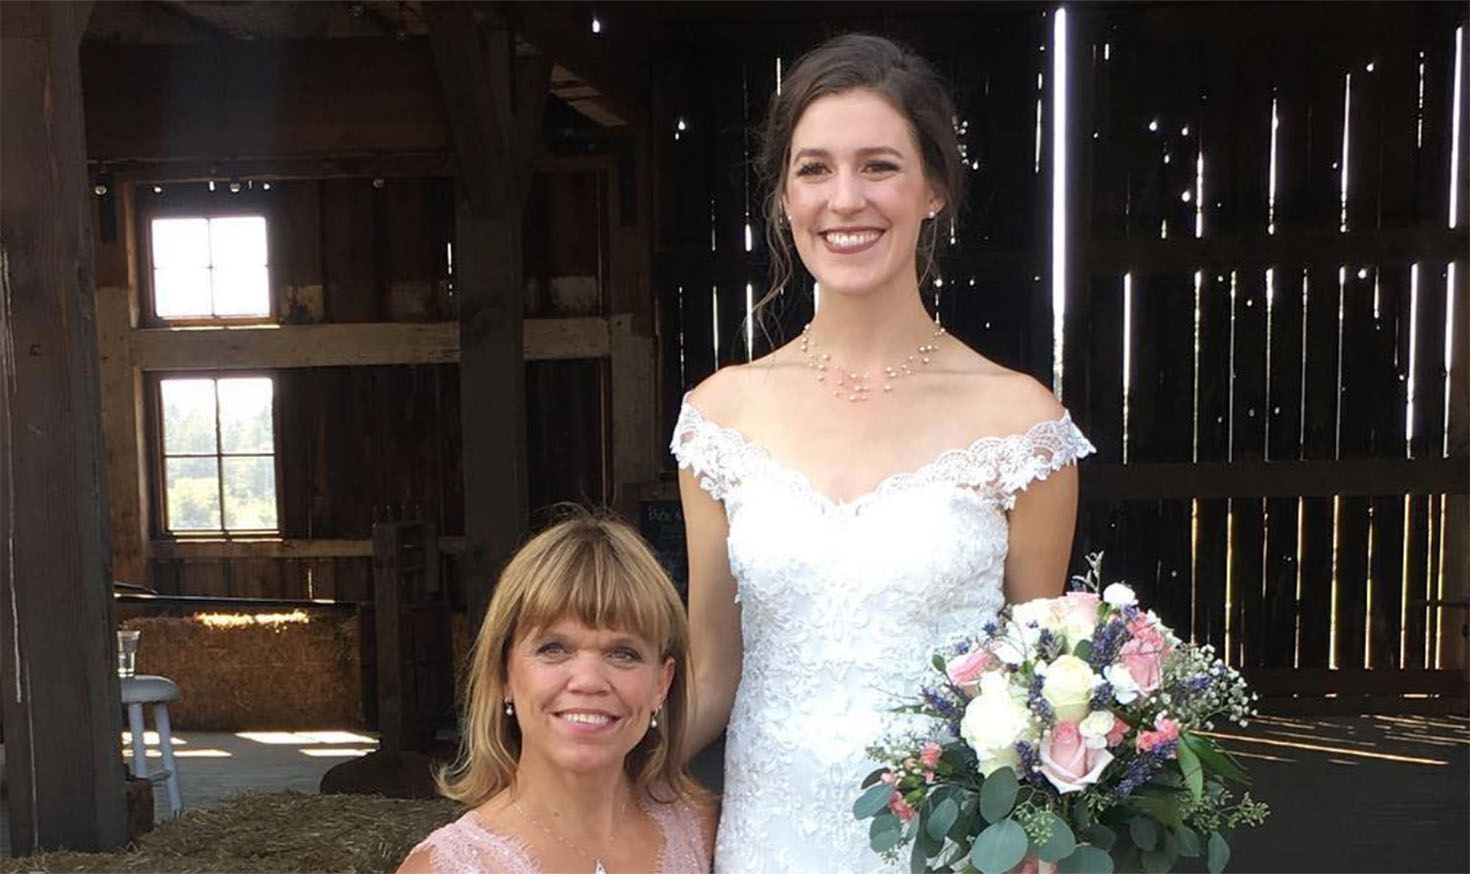 Molly Roloff with her mother